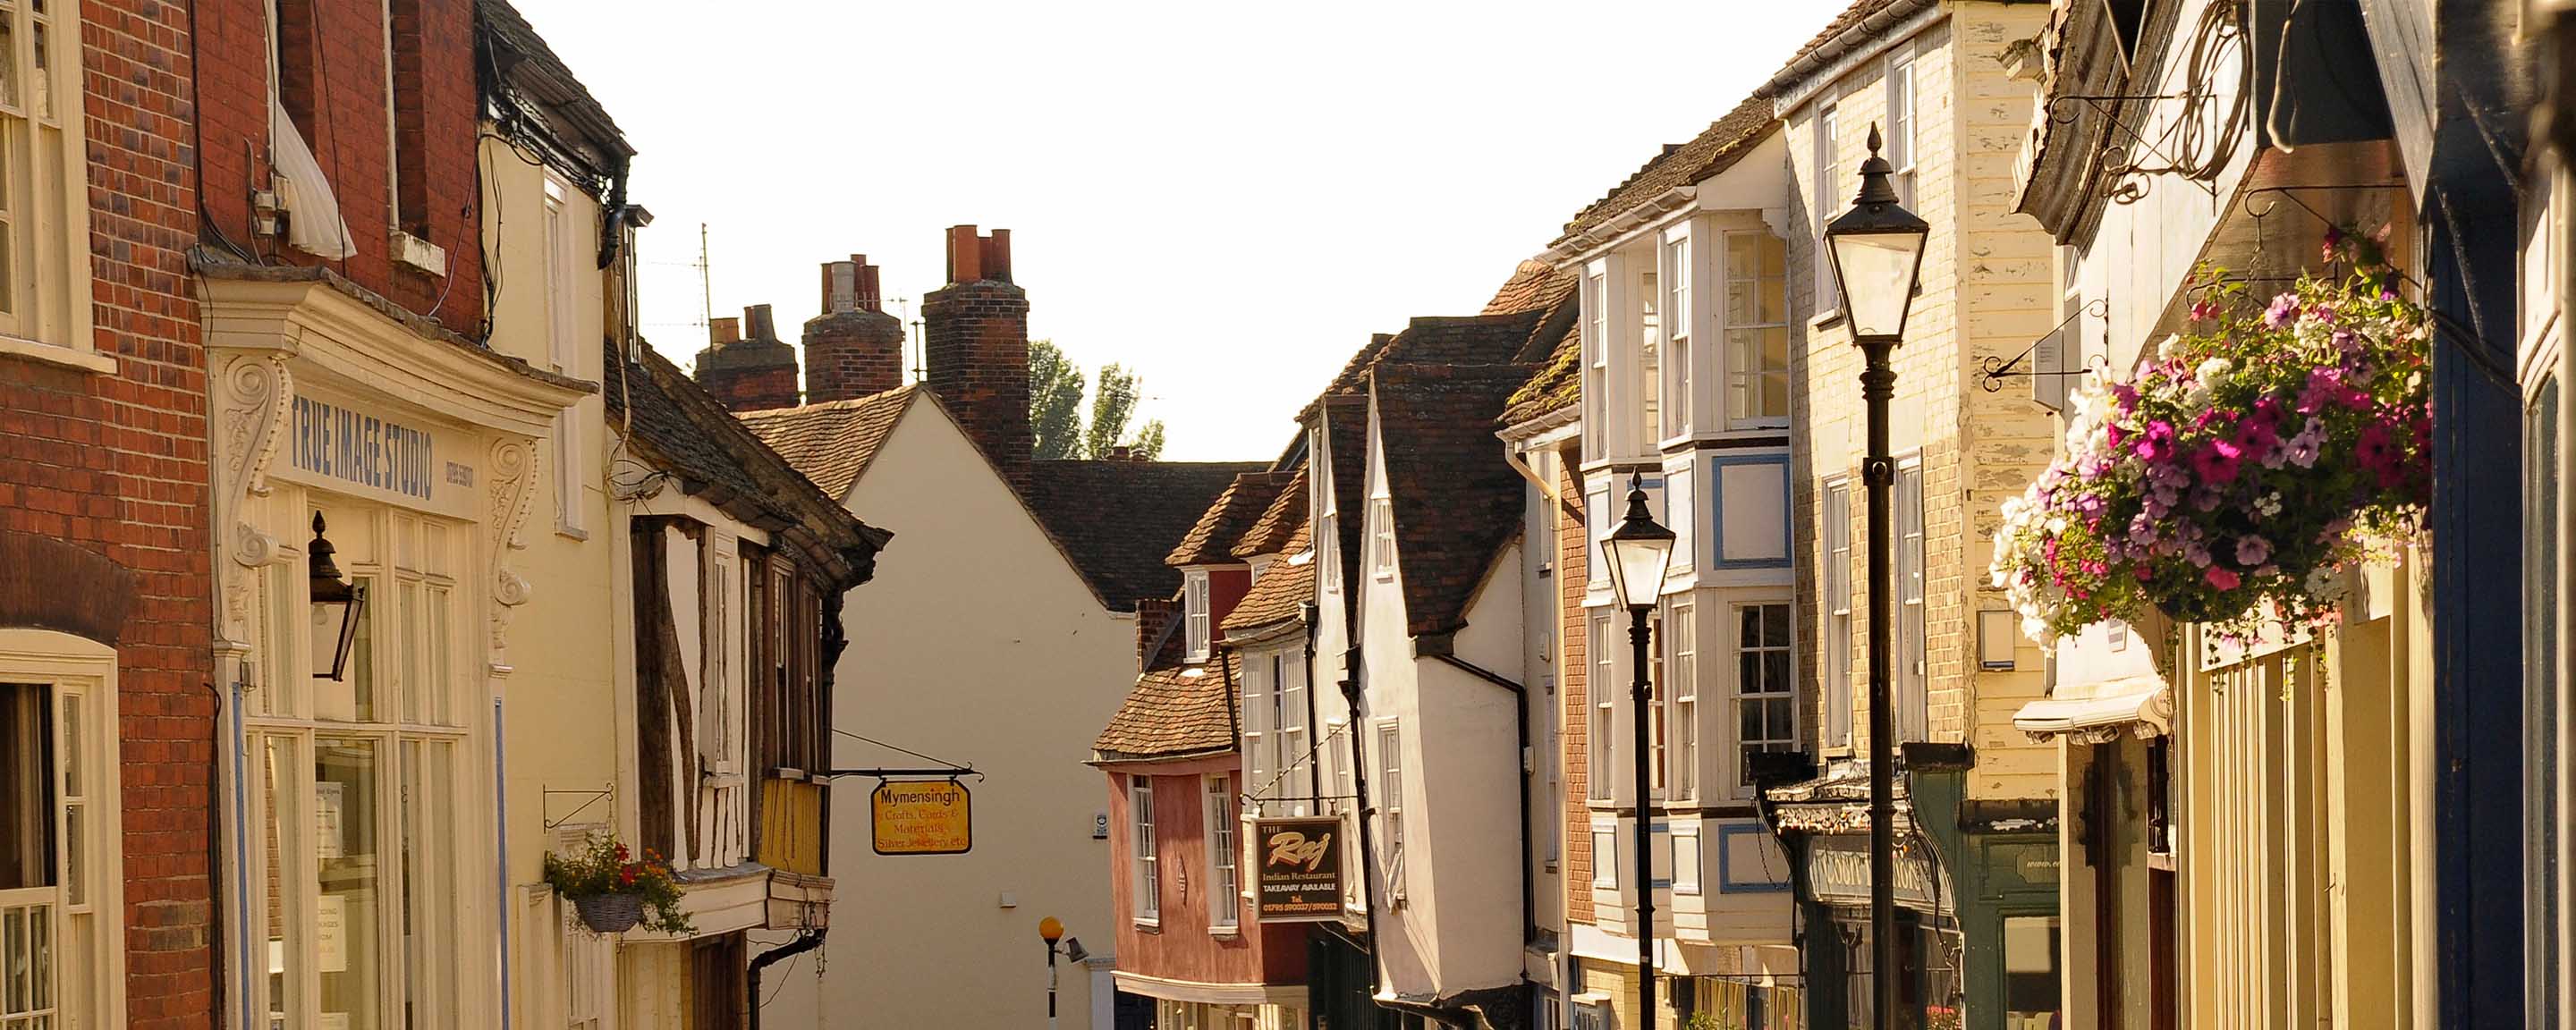 Row of houses in Faversham